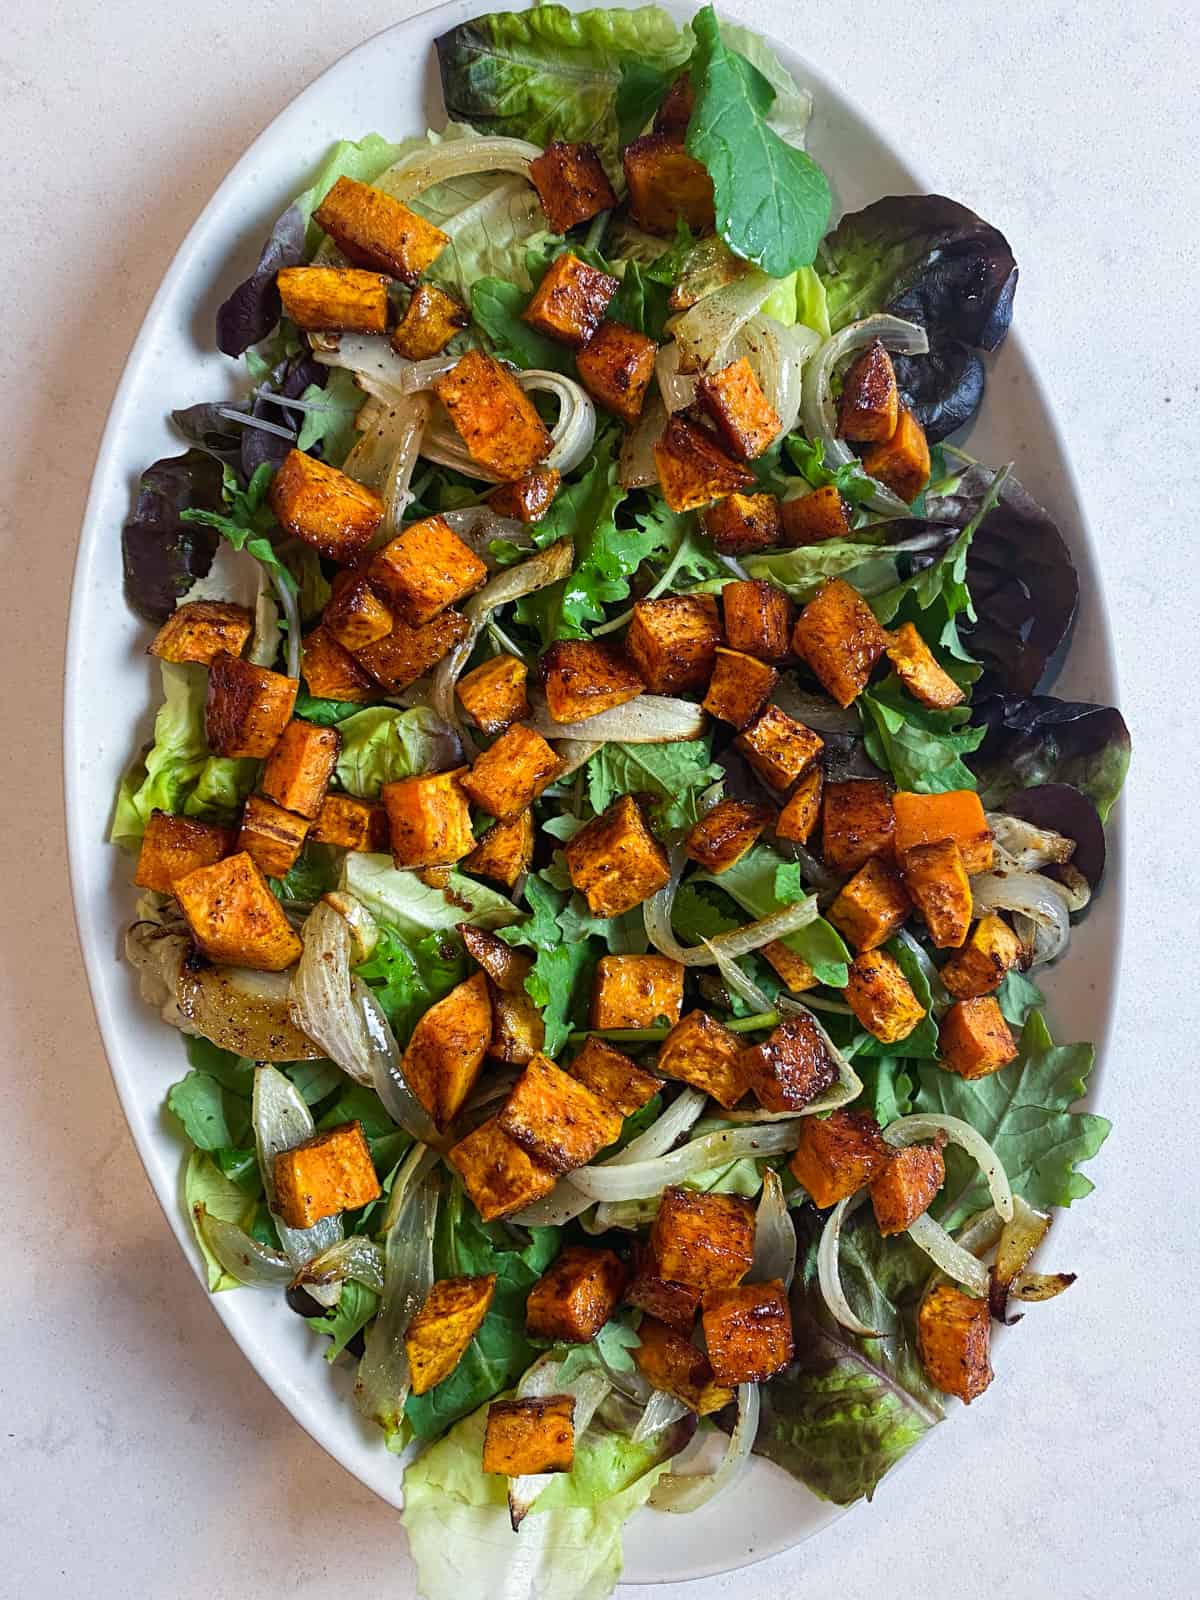 Layer the roasted sweet potatoes and caramelized onions on top of the salad greens.